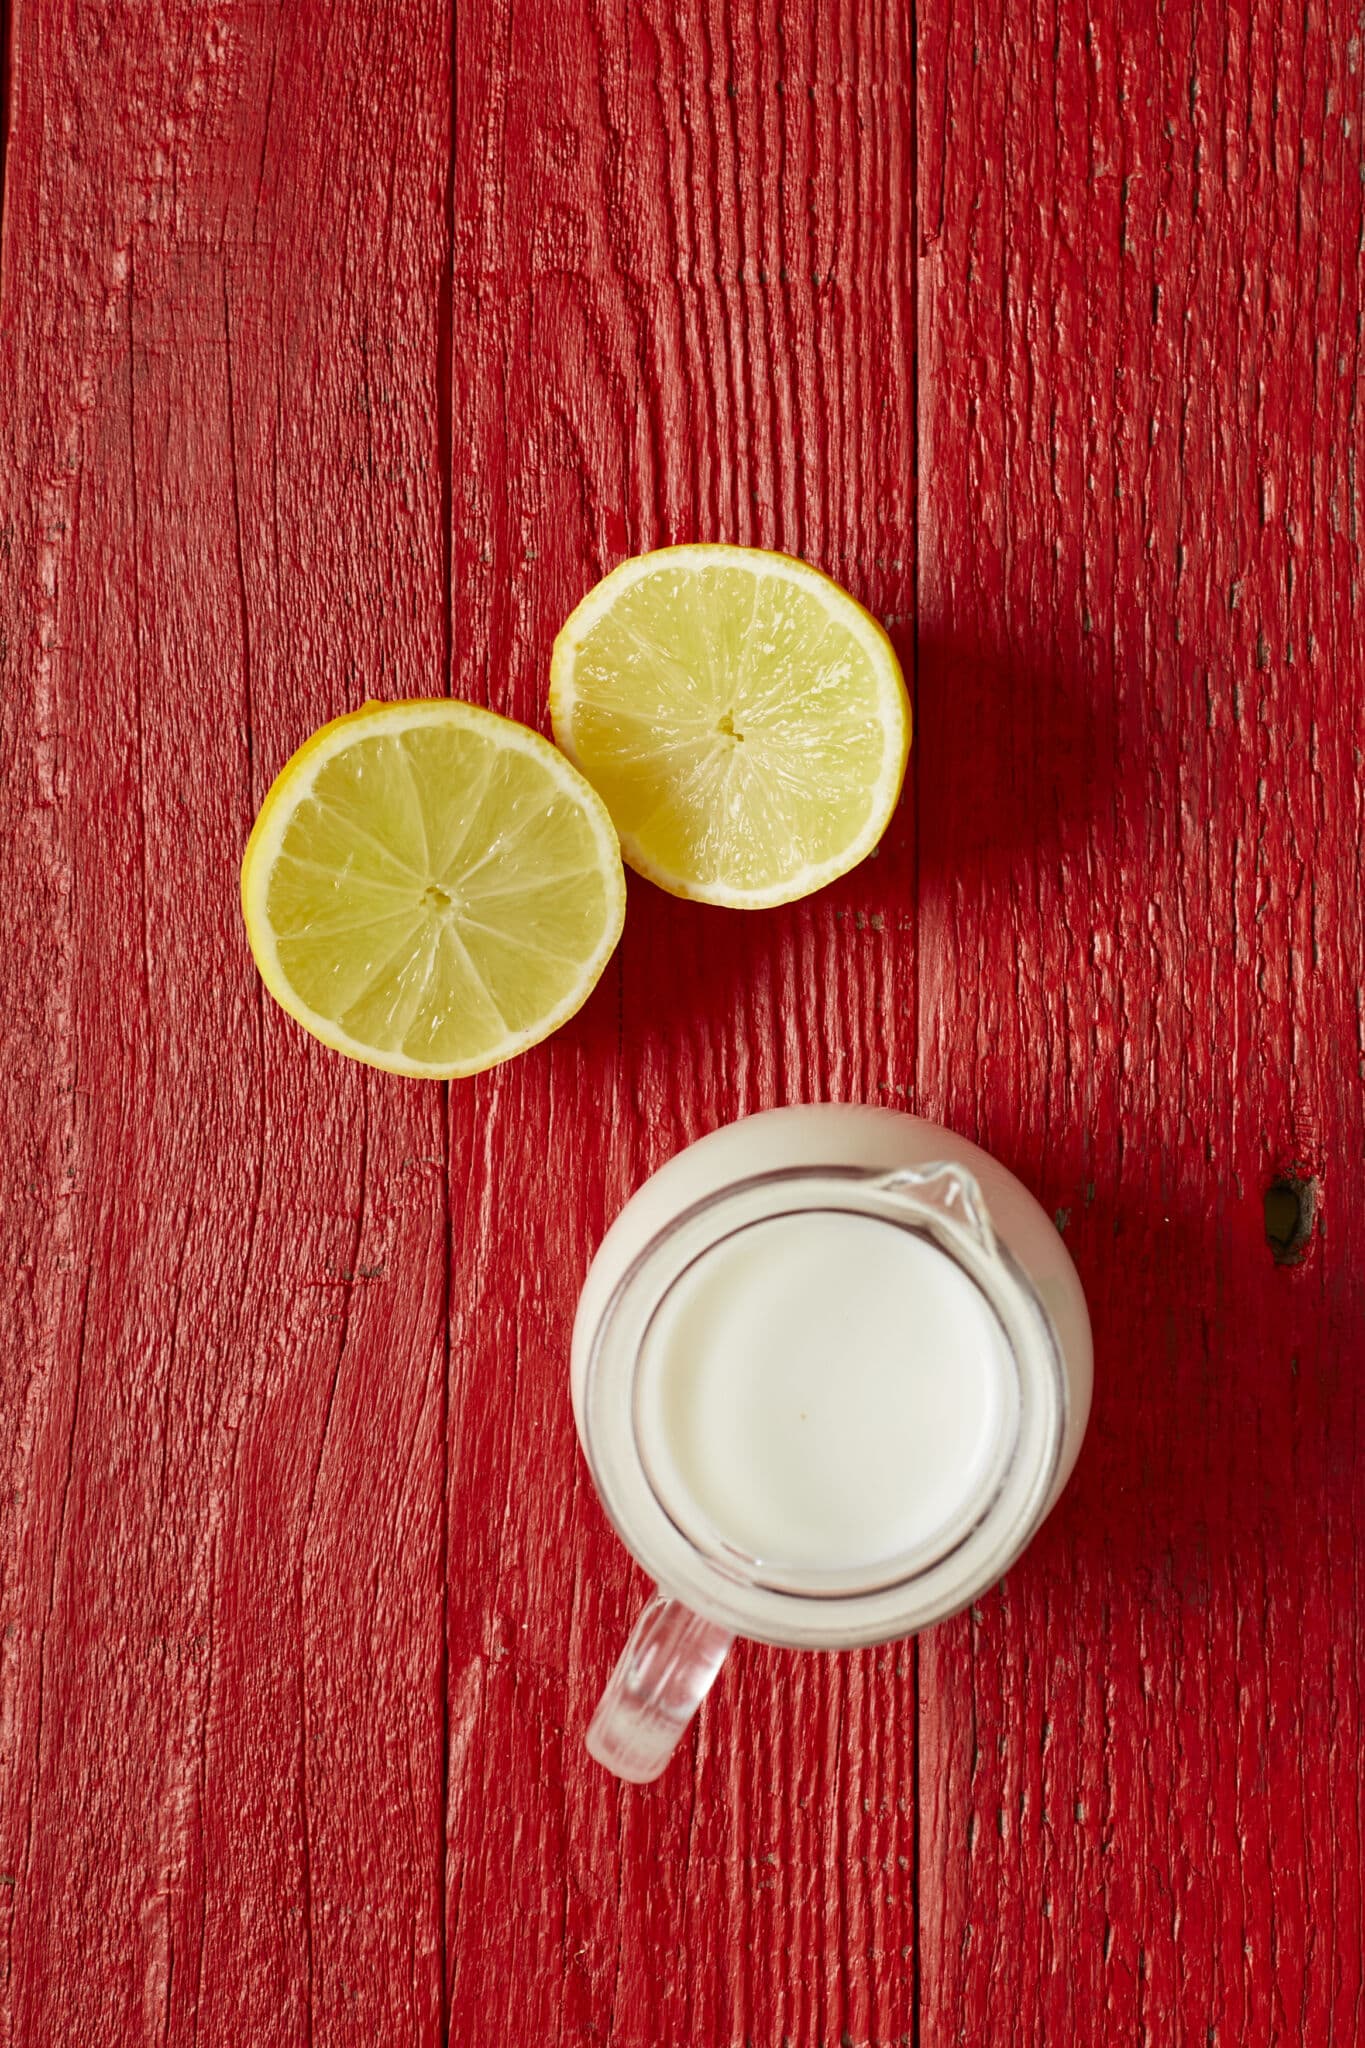 How to Make Buttermilk Substitute -Ingredients of lemons and milk